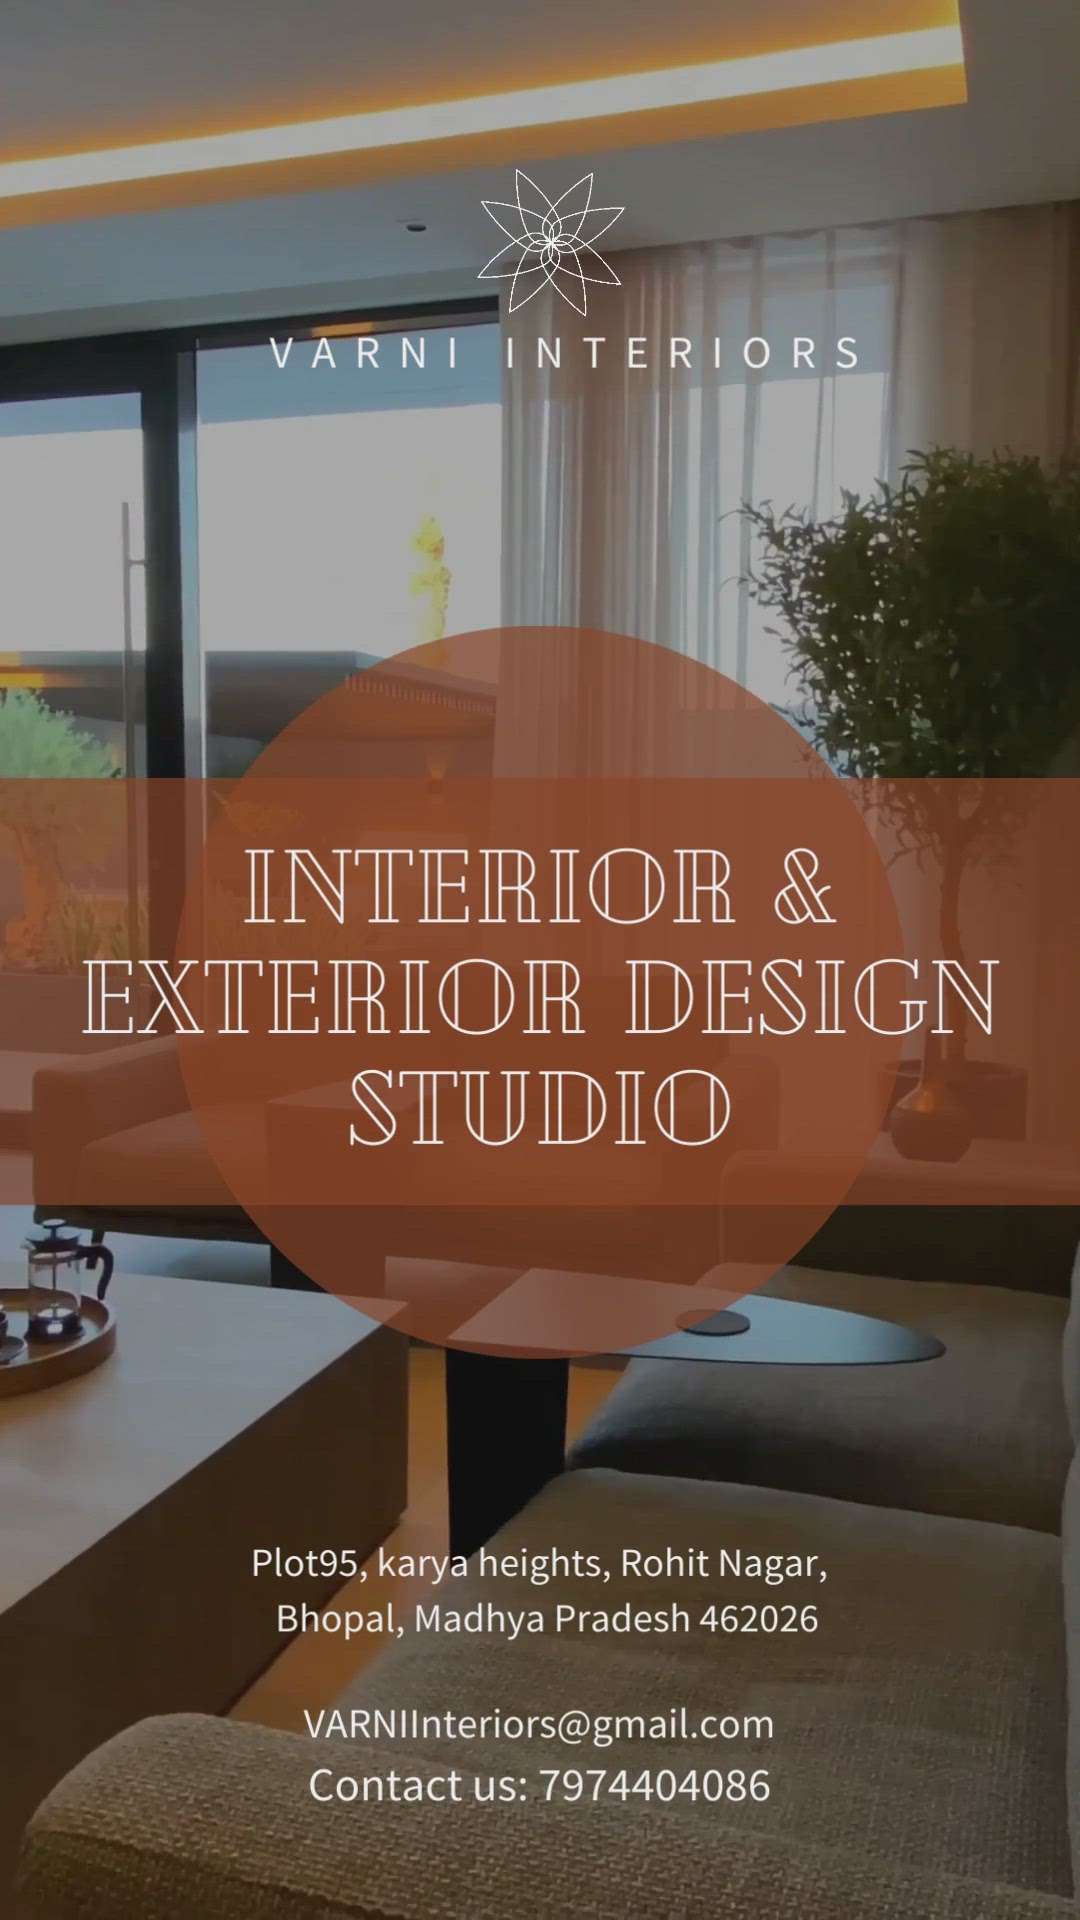 Our houses are a reflection of our personalities. They are safe and beautiful places to retreat and reflect. And we want them to look a certain way and feel a certain vibe; this is where Interior Design comes in. I am delighted to introduce to you my new interior design studio. 
Regards- Gunjan 
#interiordesignernearme  #InteriorDesigner  #BedroomDesigns  #BedroomIdeas  #LUXURY_INTERIOR  #luxurydesign  #autocad  #autocaddrawing  #3dmodeling  #3DKitchenPlan  #3dmaxrender  #HomeDecor  #HouseRenovation  #KitchenIdeas  #KitchenRenovation #bestinterior